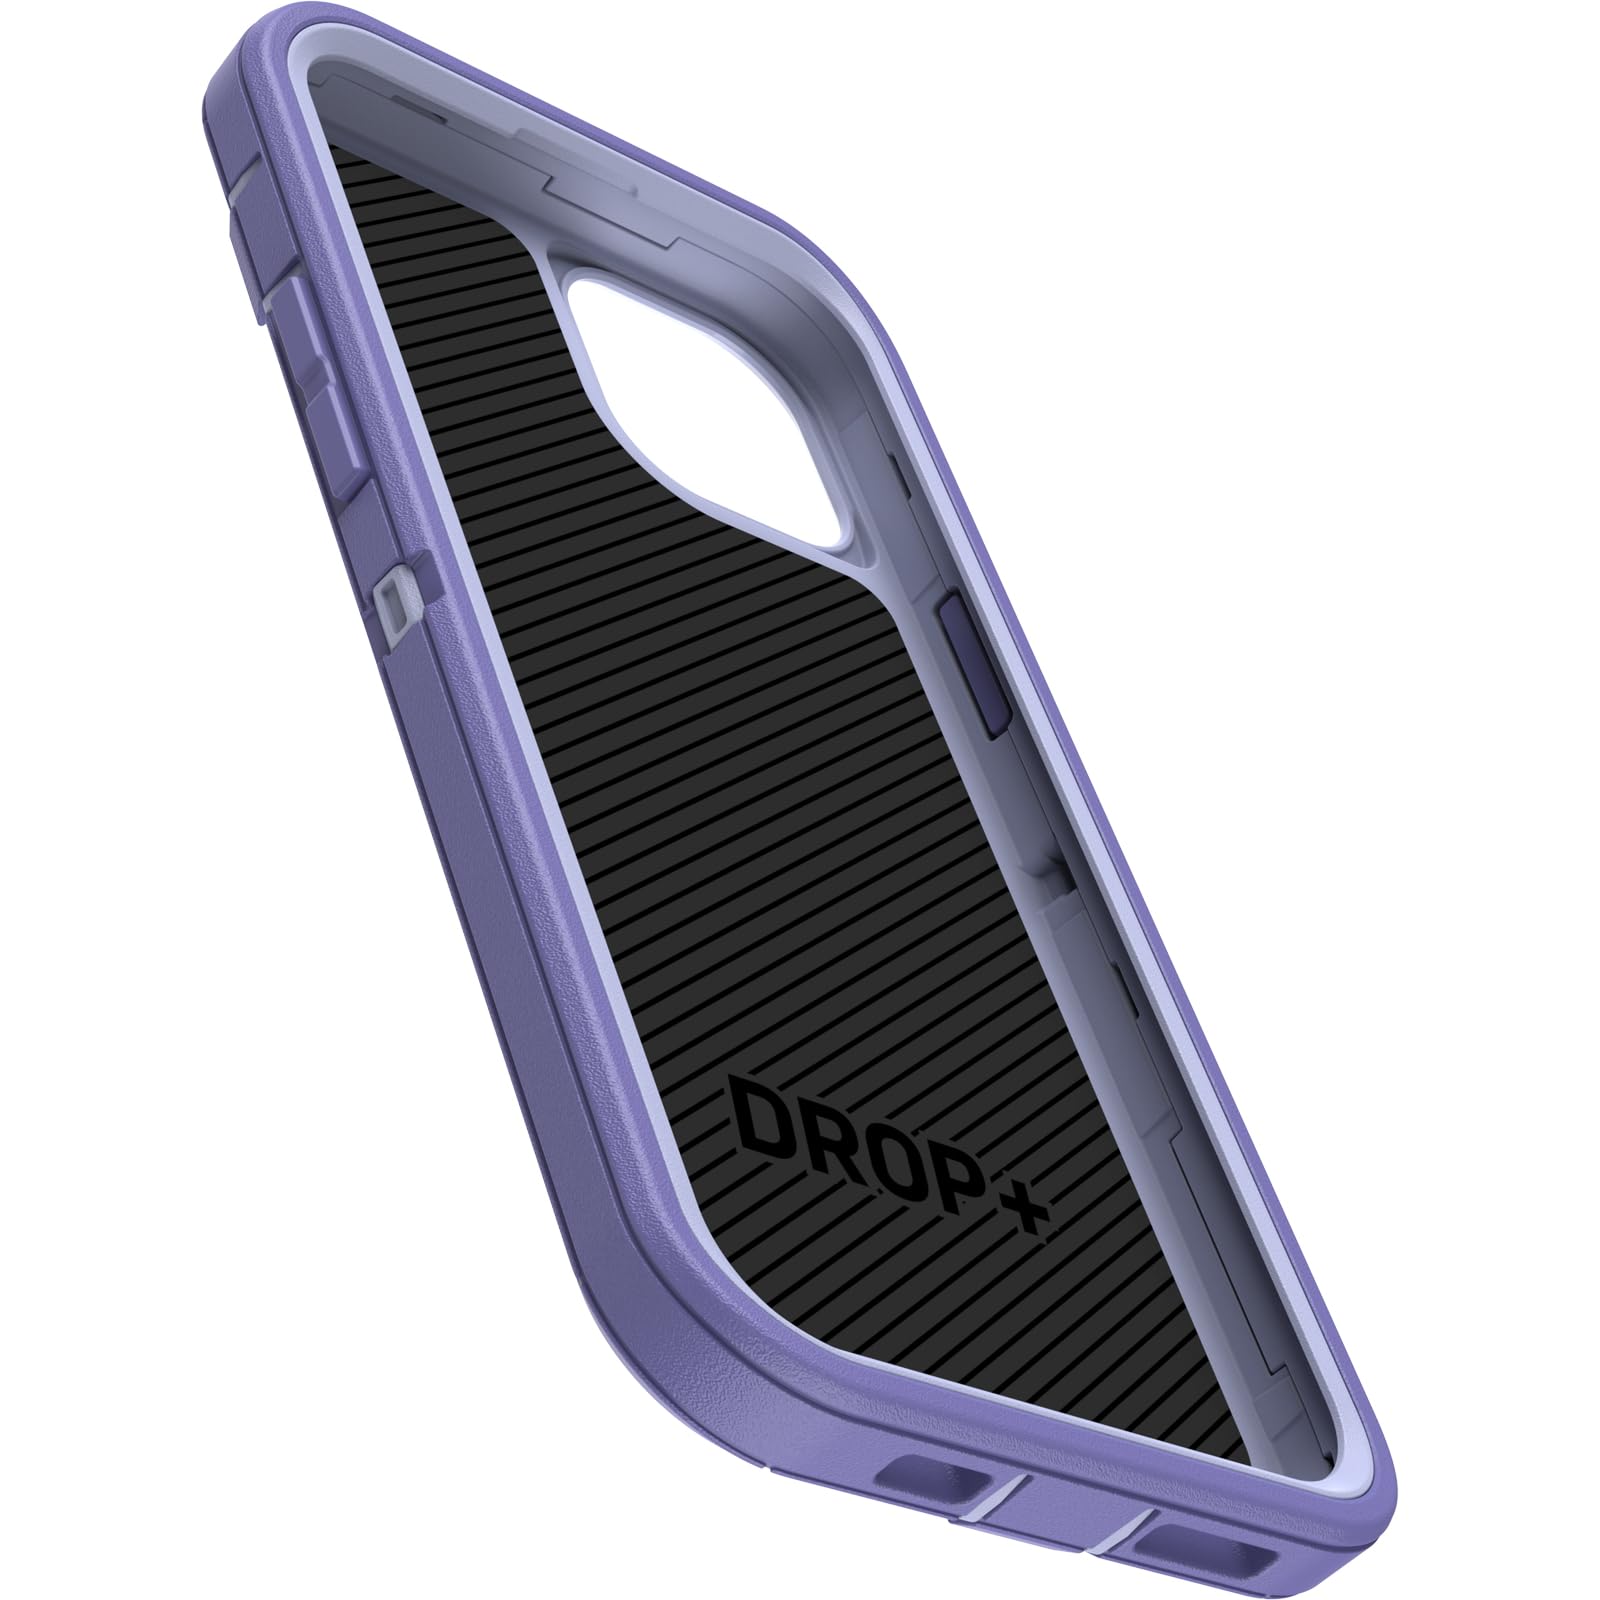 OtterBox iPhone 15 Plus and iPhone 14 Plus Defender Series Case - MOUNTAIN MAJESTY (Purple), screenless, rugged & durable, with port protection, includes holster clip kickstand